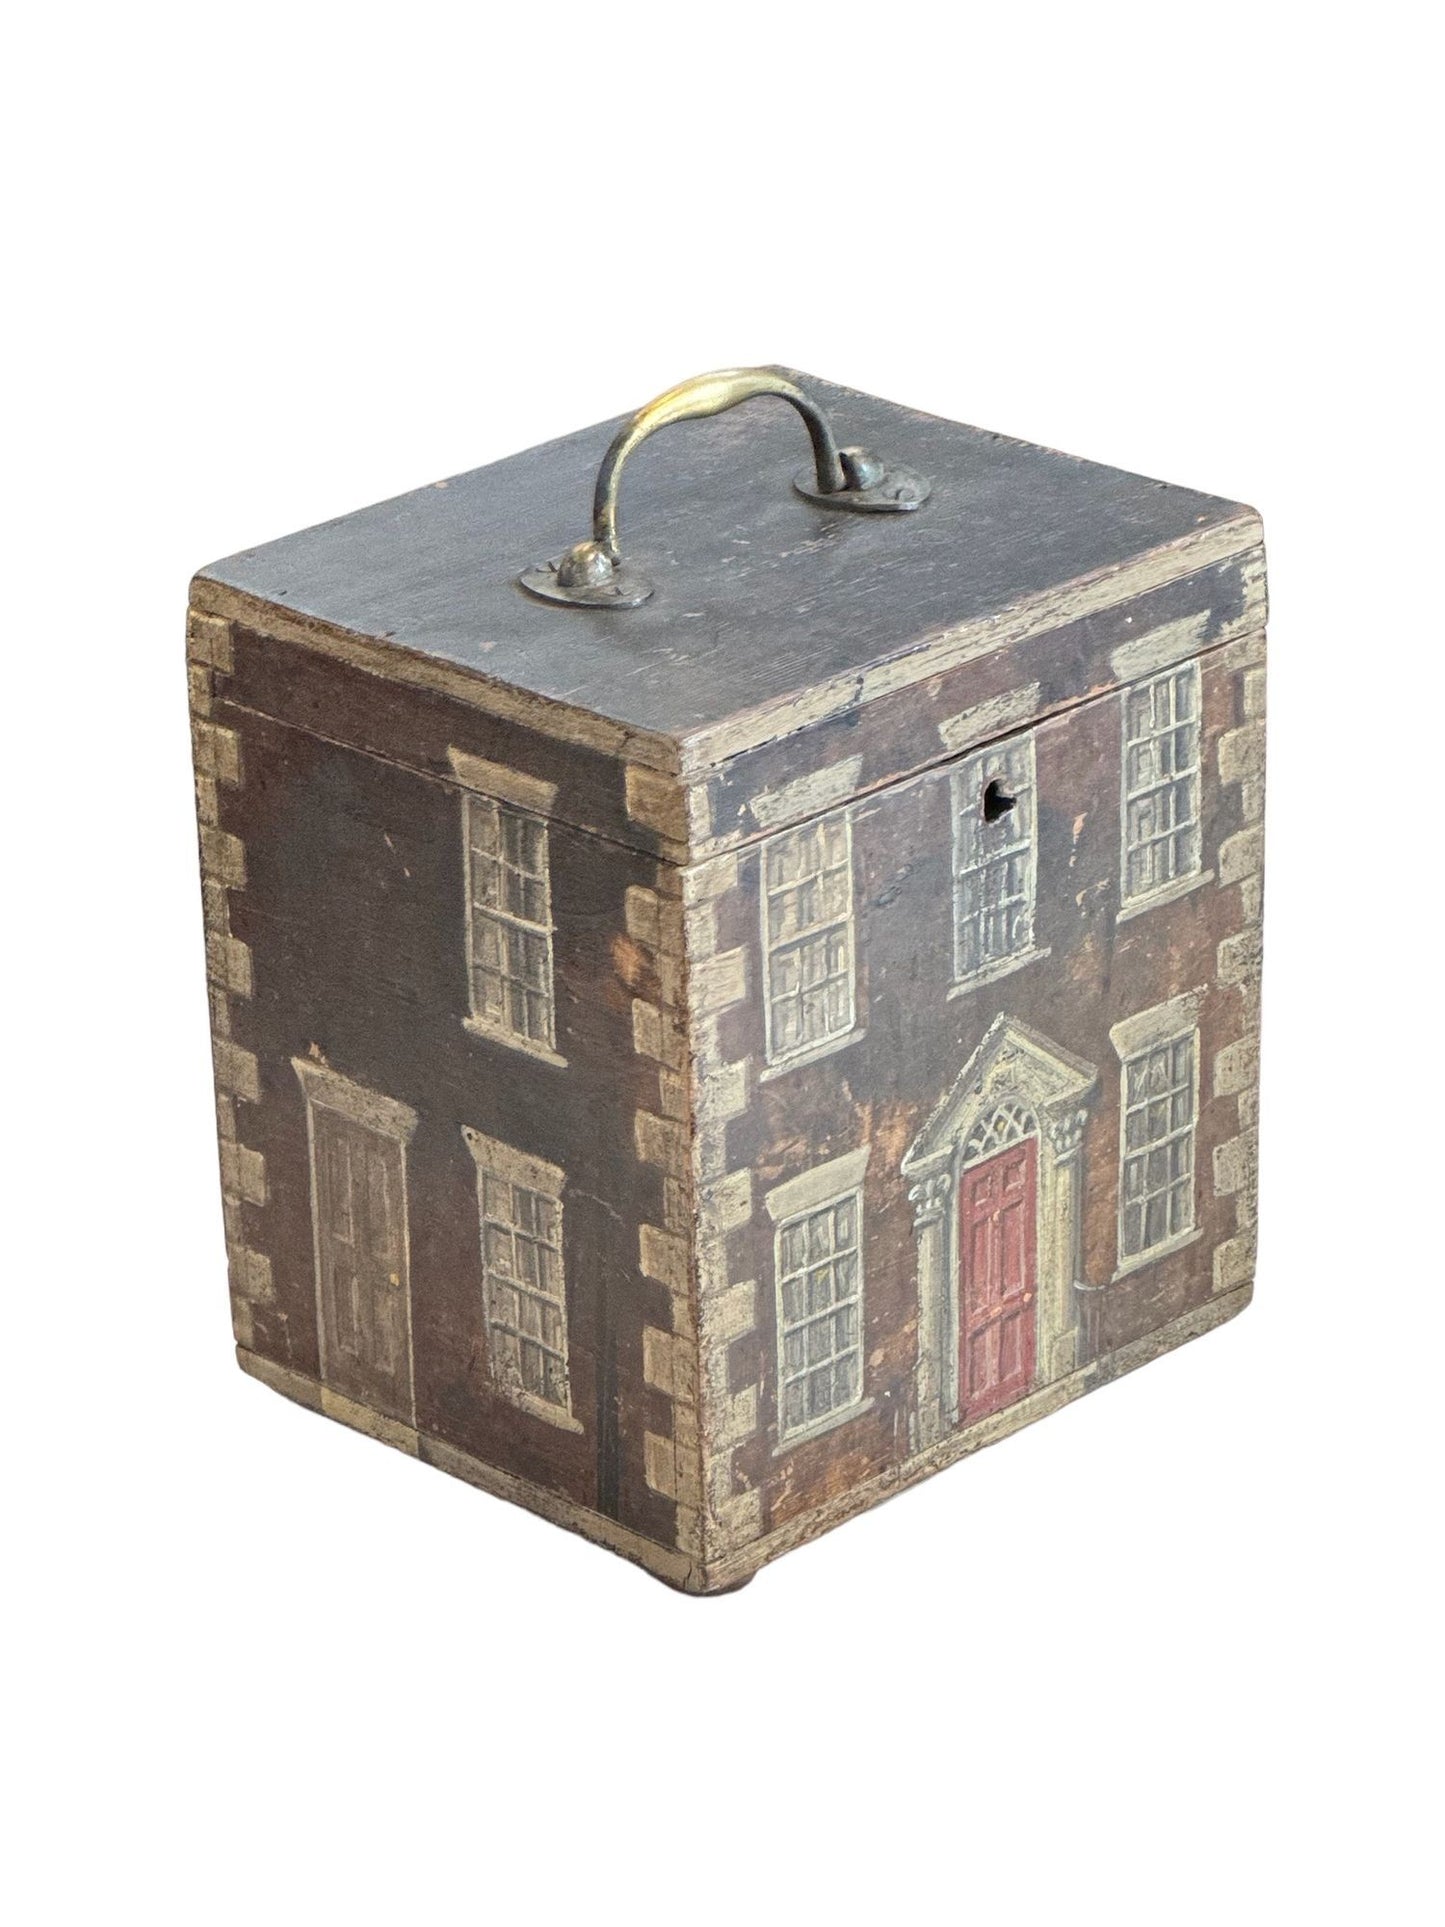 An English Box with Handle painted to look like a Georgian House, Early 19th Century